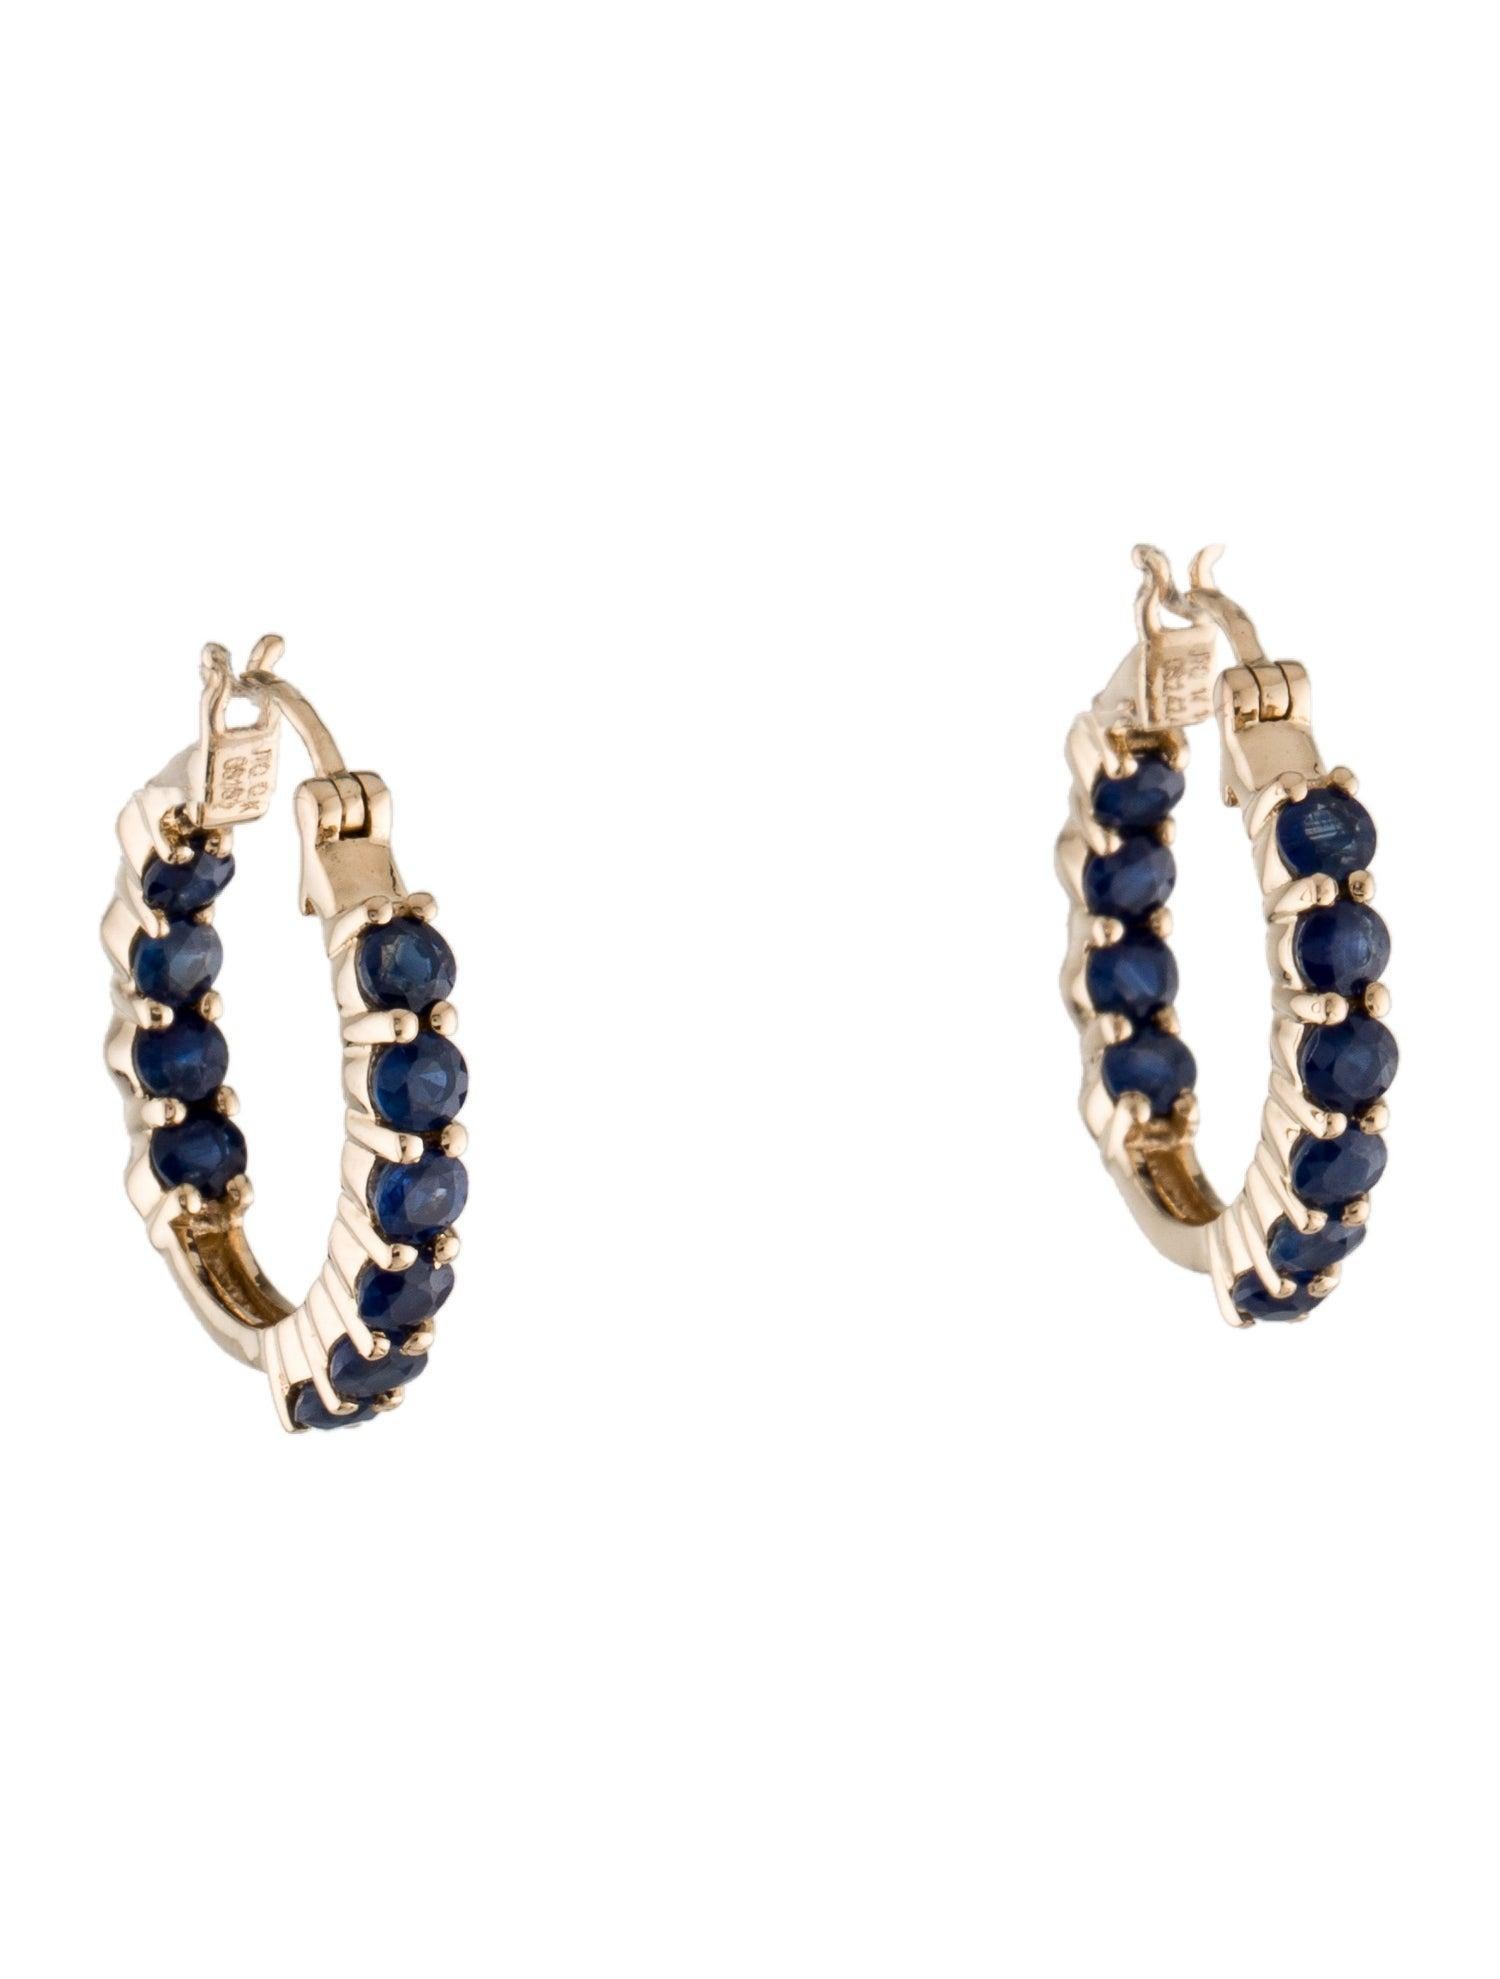 Immerse yourself in the enchanting allure of the ocean with our Beneath the Waves: Ocean Symphony Sapphire Earrings. As part of our breathtaking collection inspired by the captivating beauty of the sea, these earrings showcase the mesmerizing shades